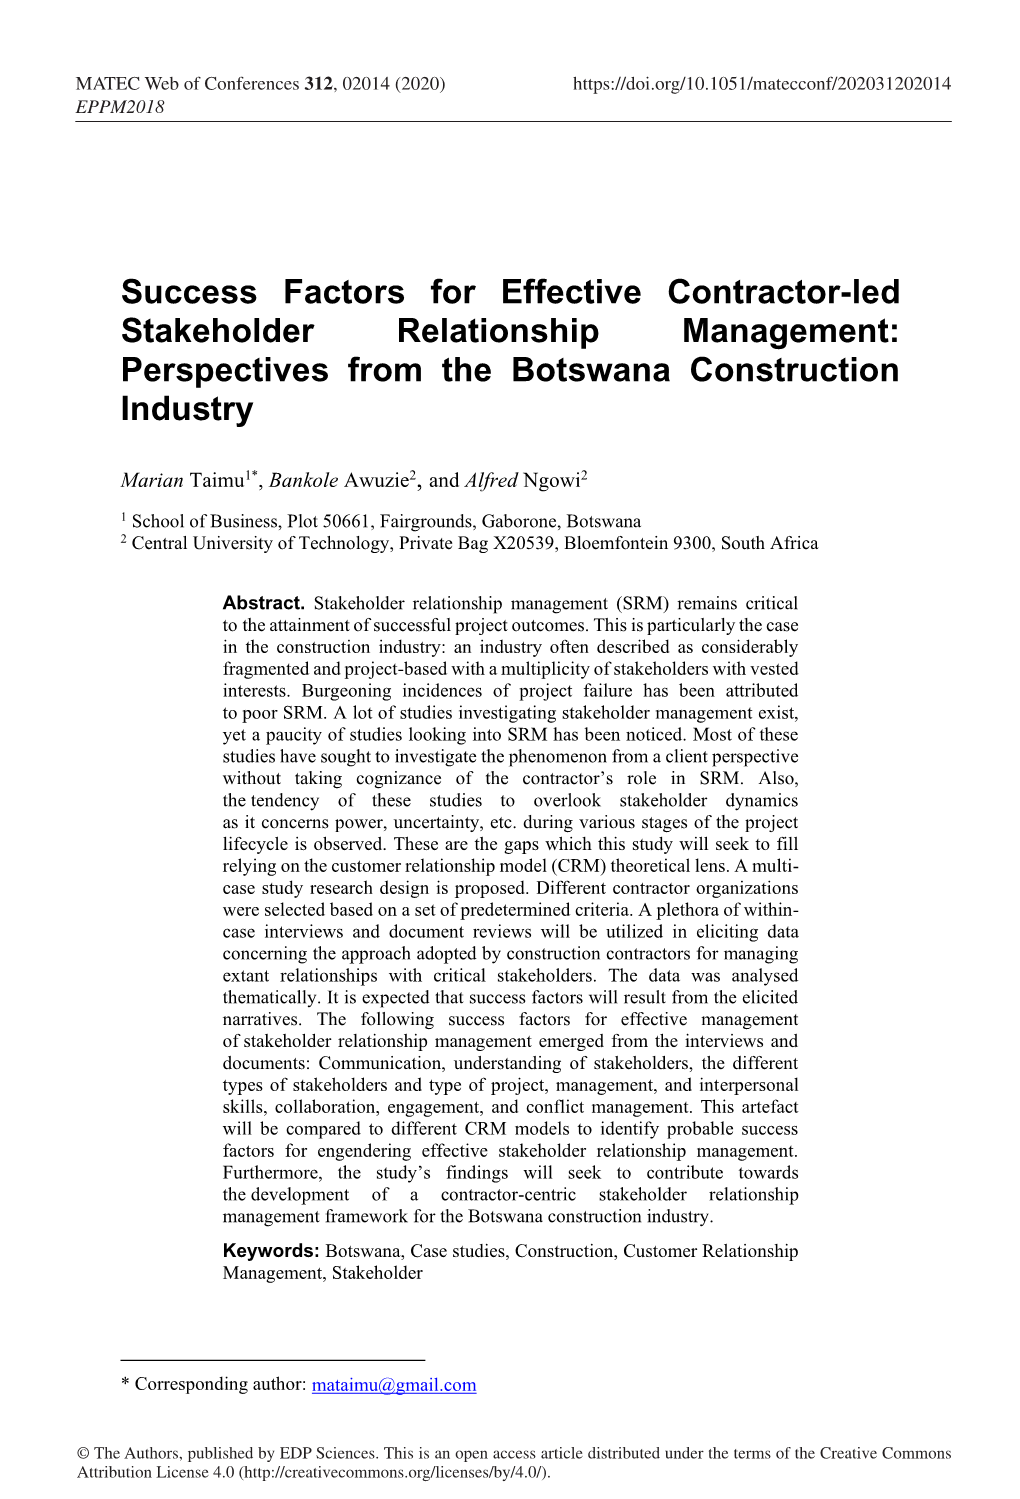 Success Factors for Effective Contractor-Led Stakeholder Relationship Management: Perspectives from the Botswana Construction Industry